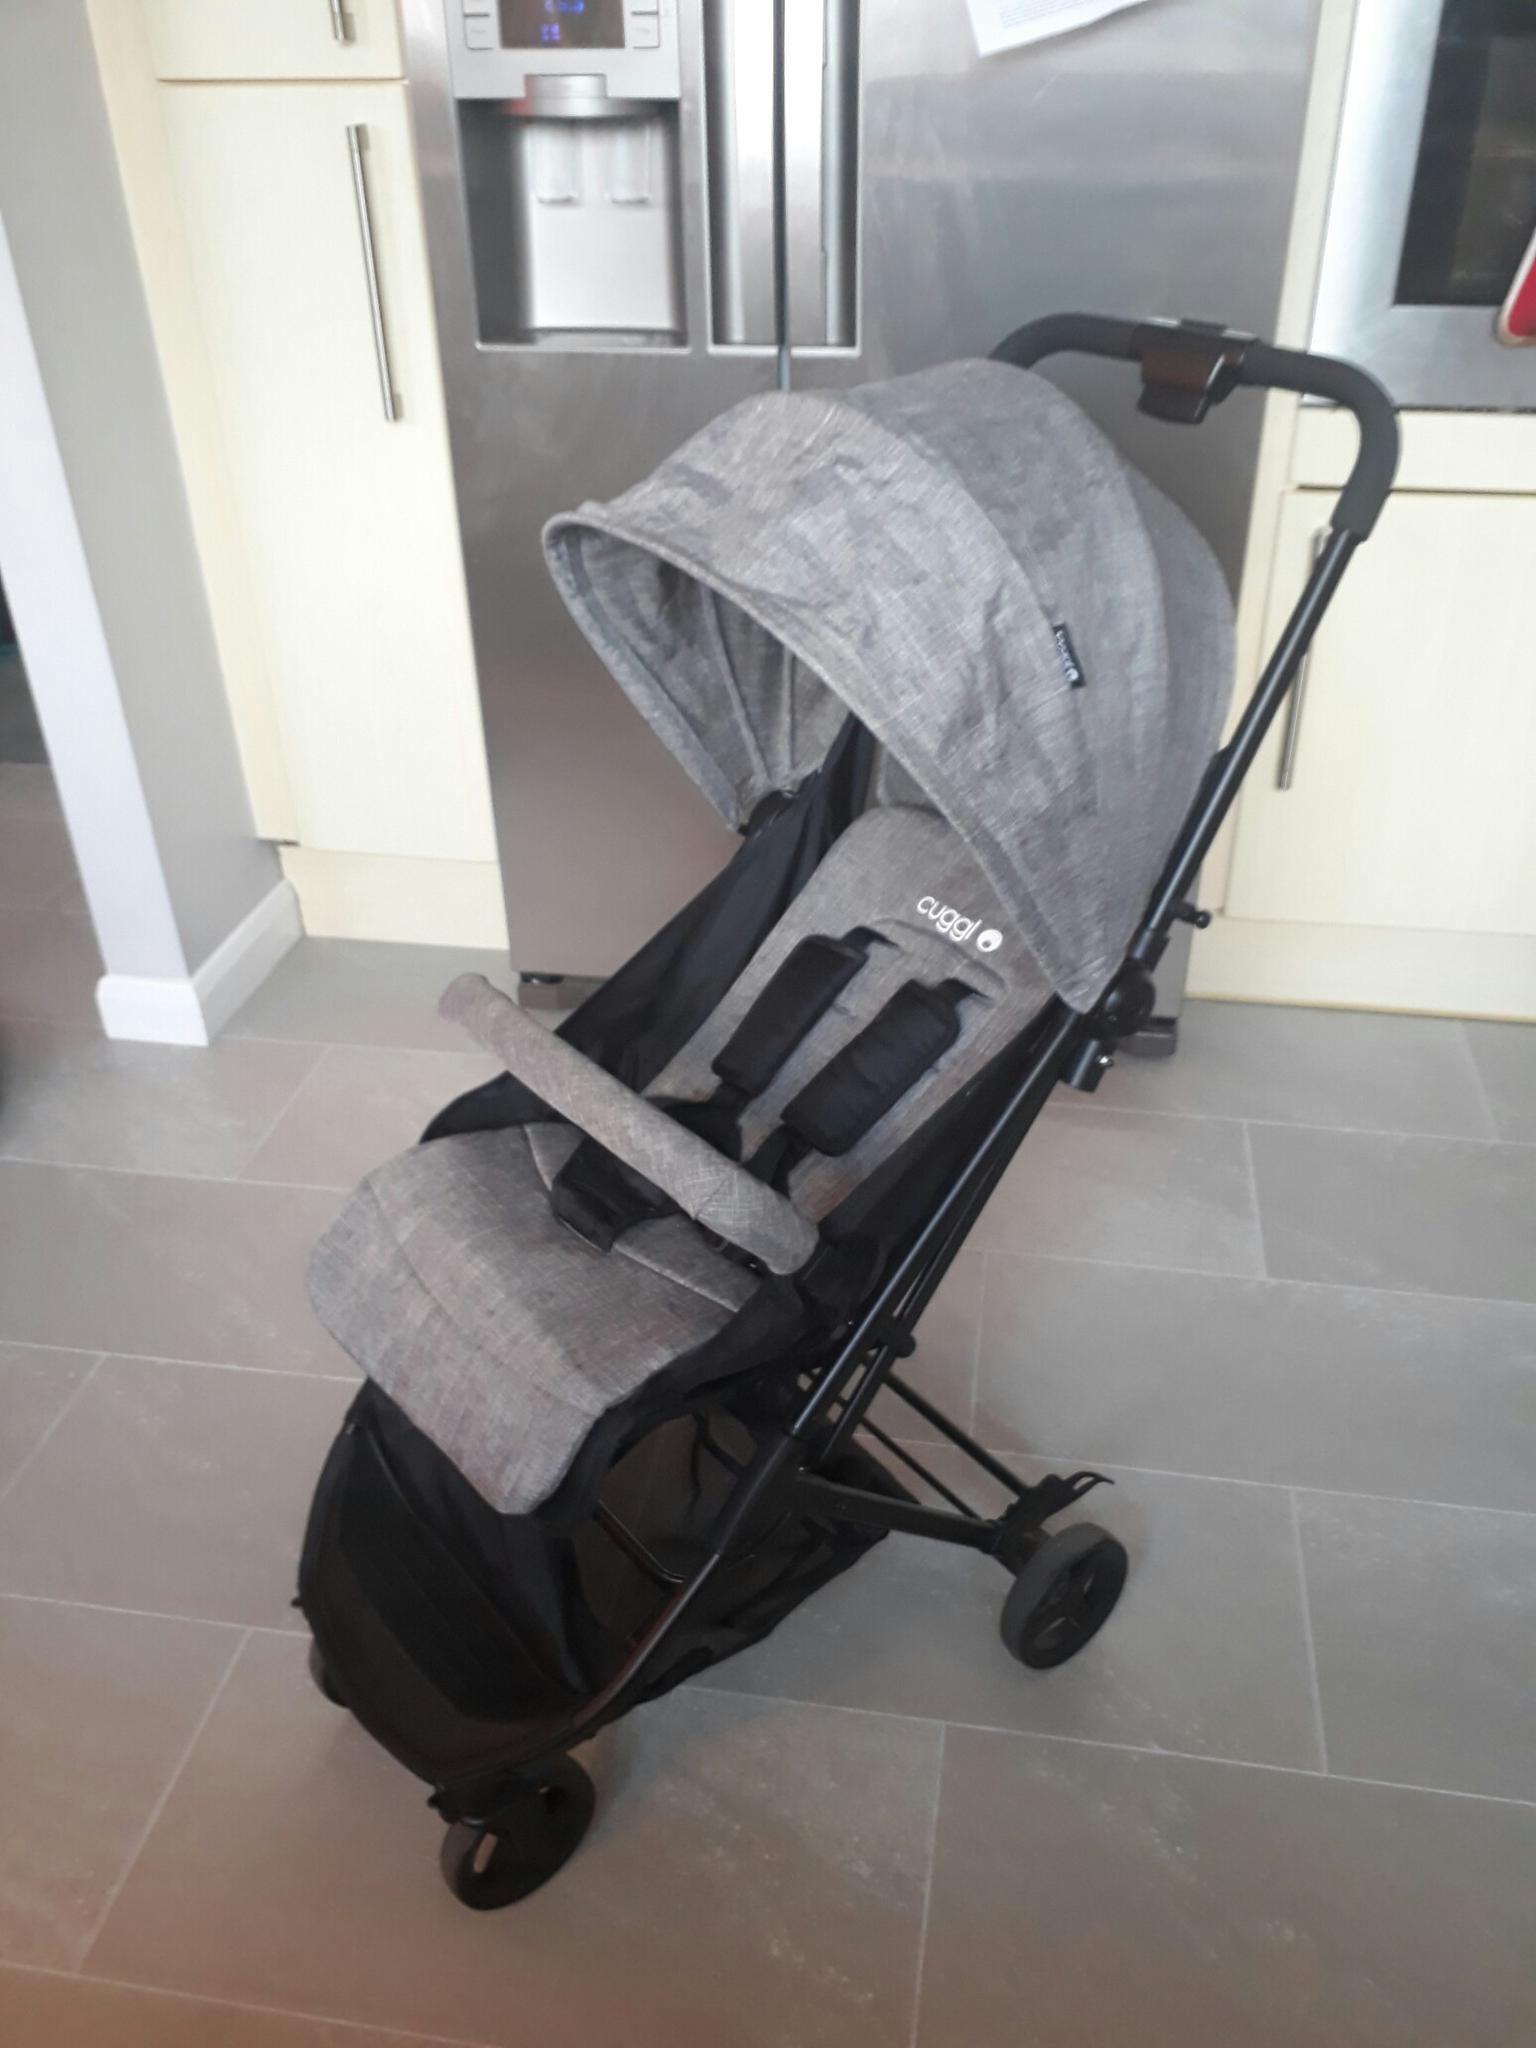 cuggl compact stroller